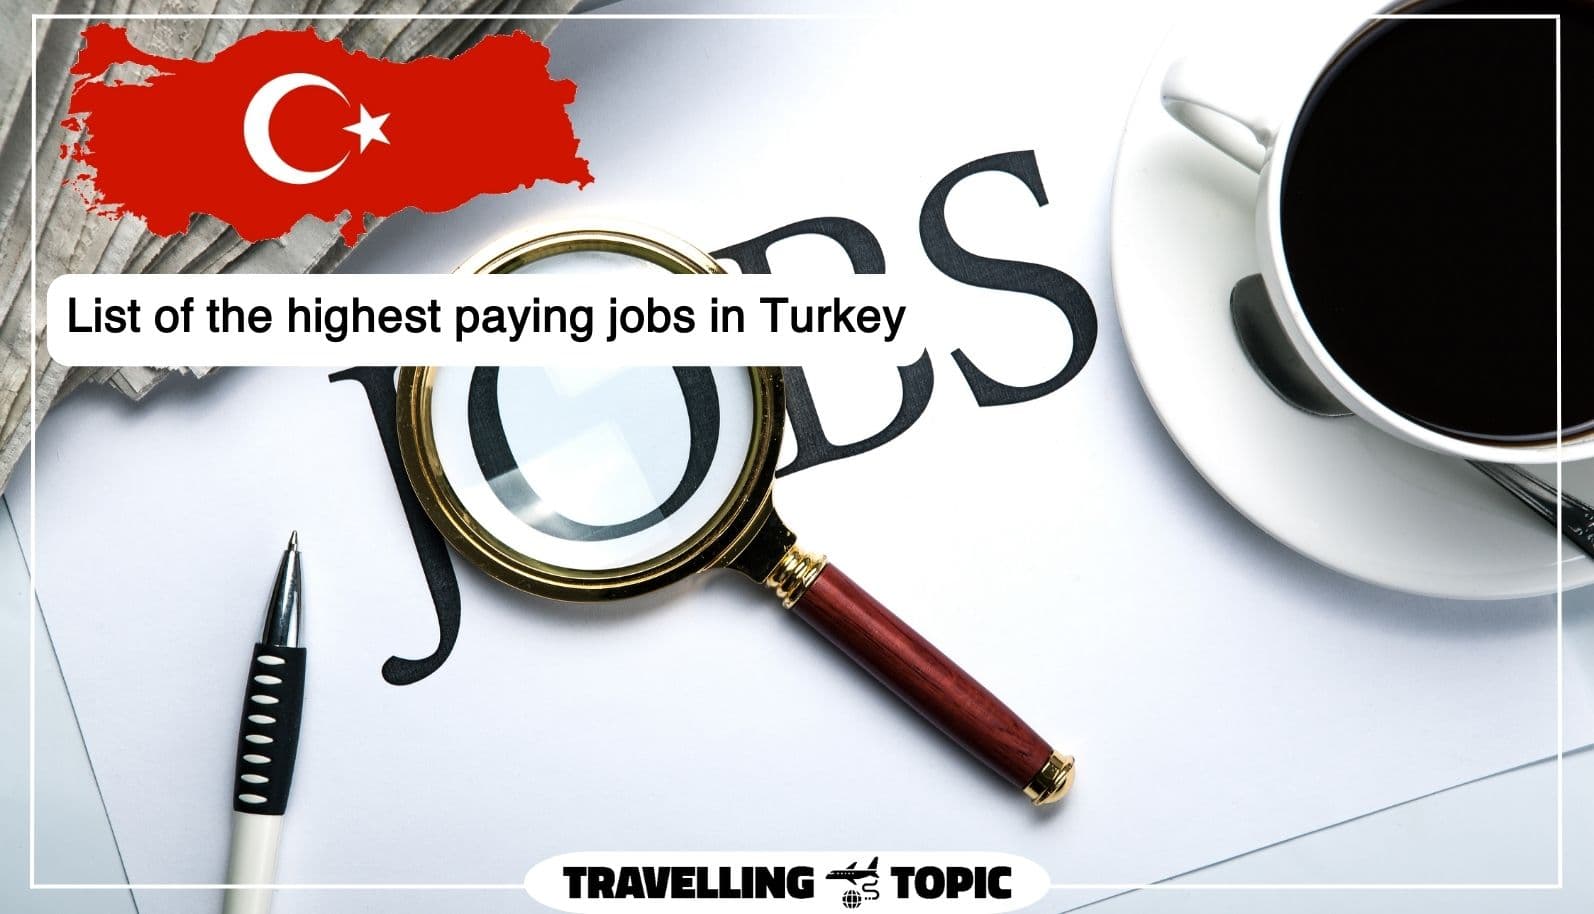 List of the highest paying jobs in Turkey